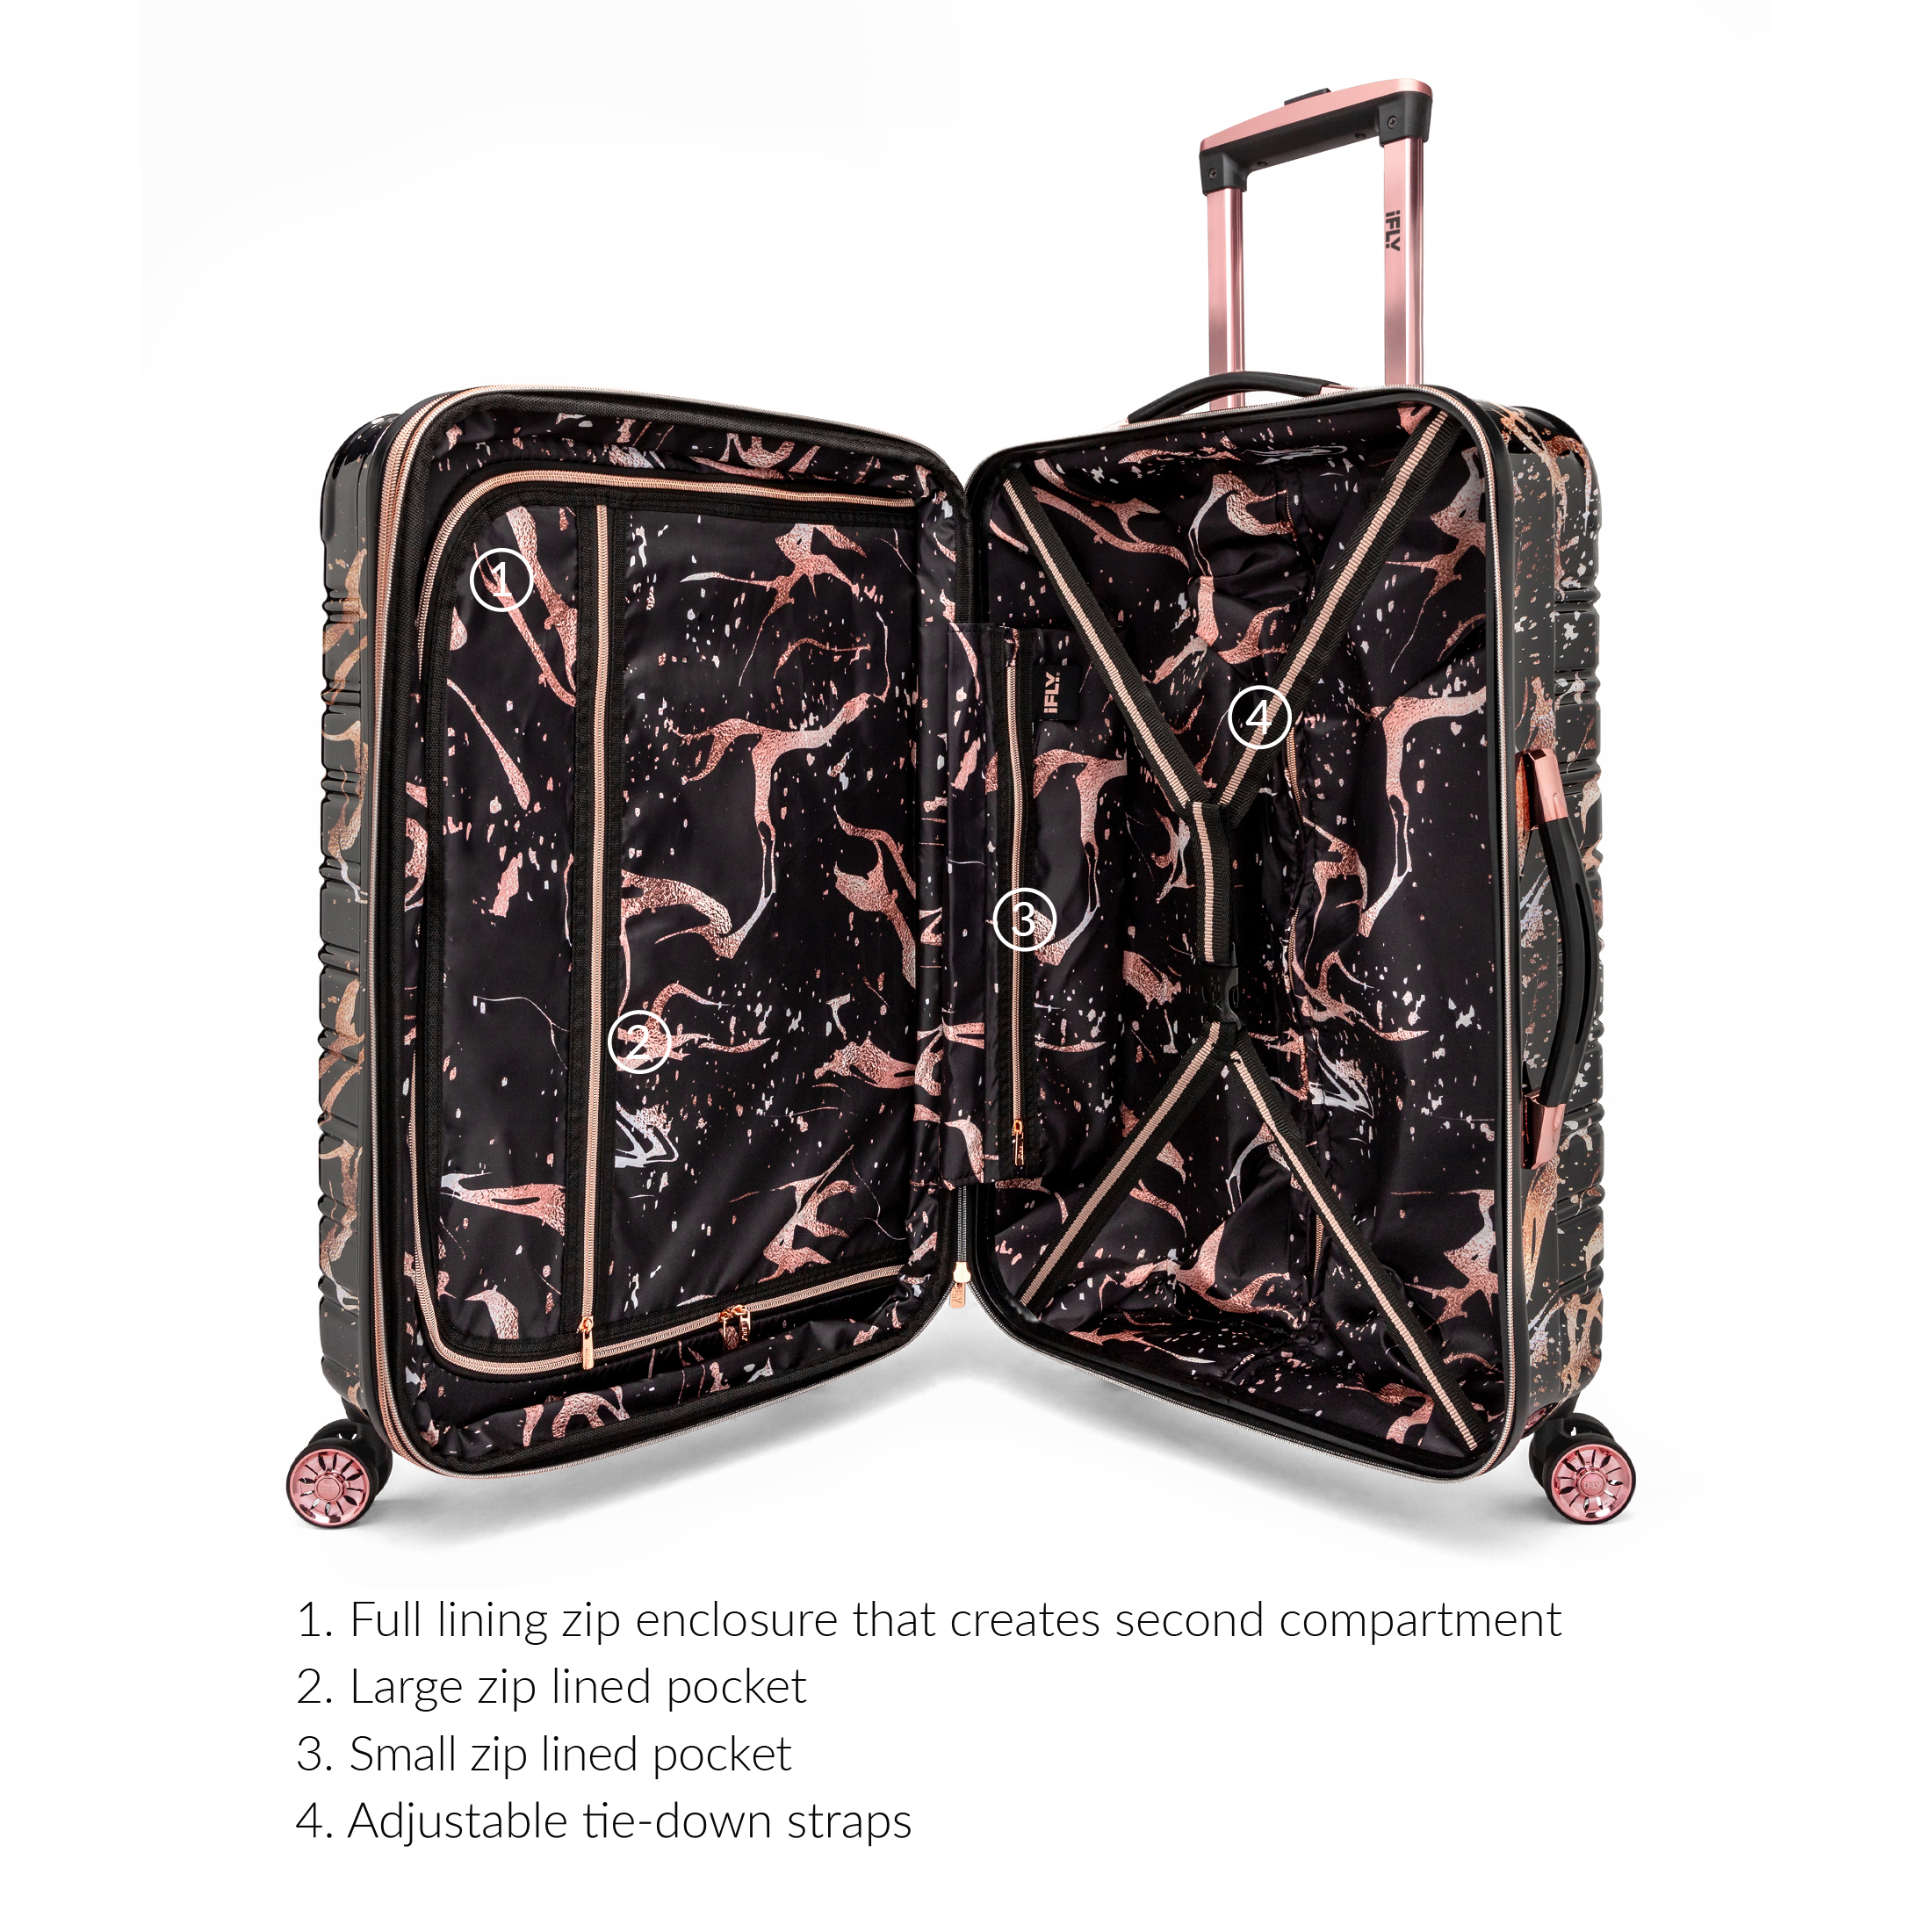 IFLY - Fibertech Marble Hardside Luggage 20 Inch Carry-on,  Black/Rose Gold - image 2 of 7